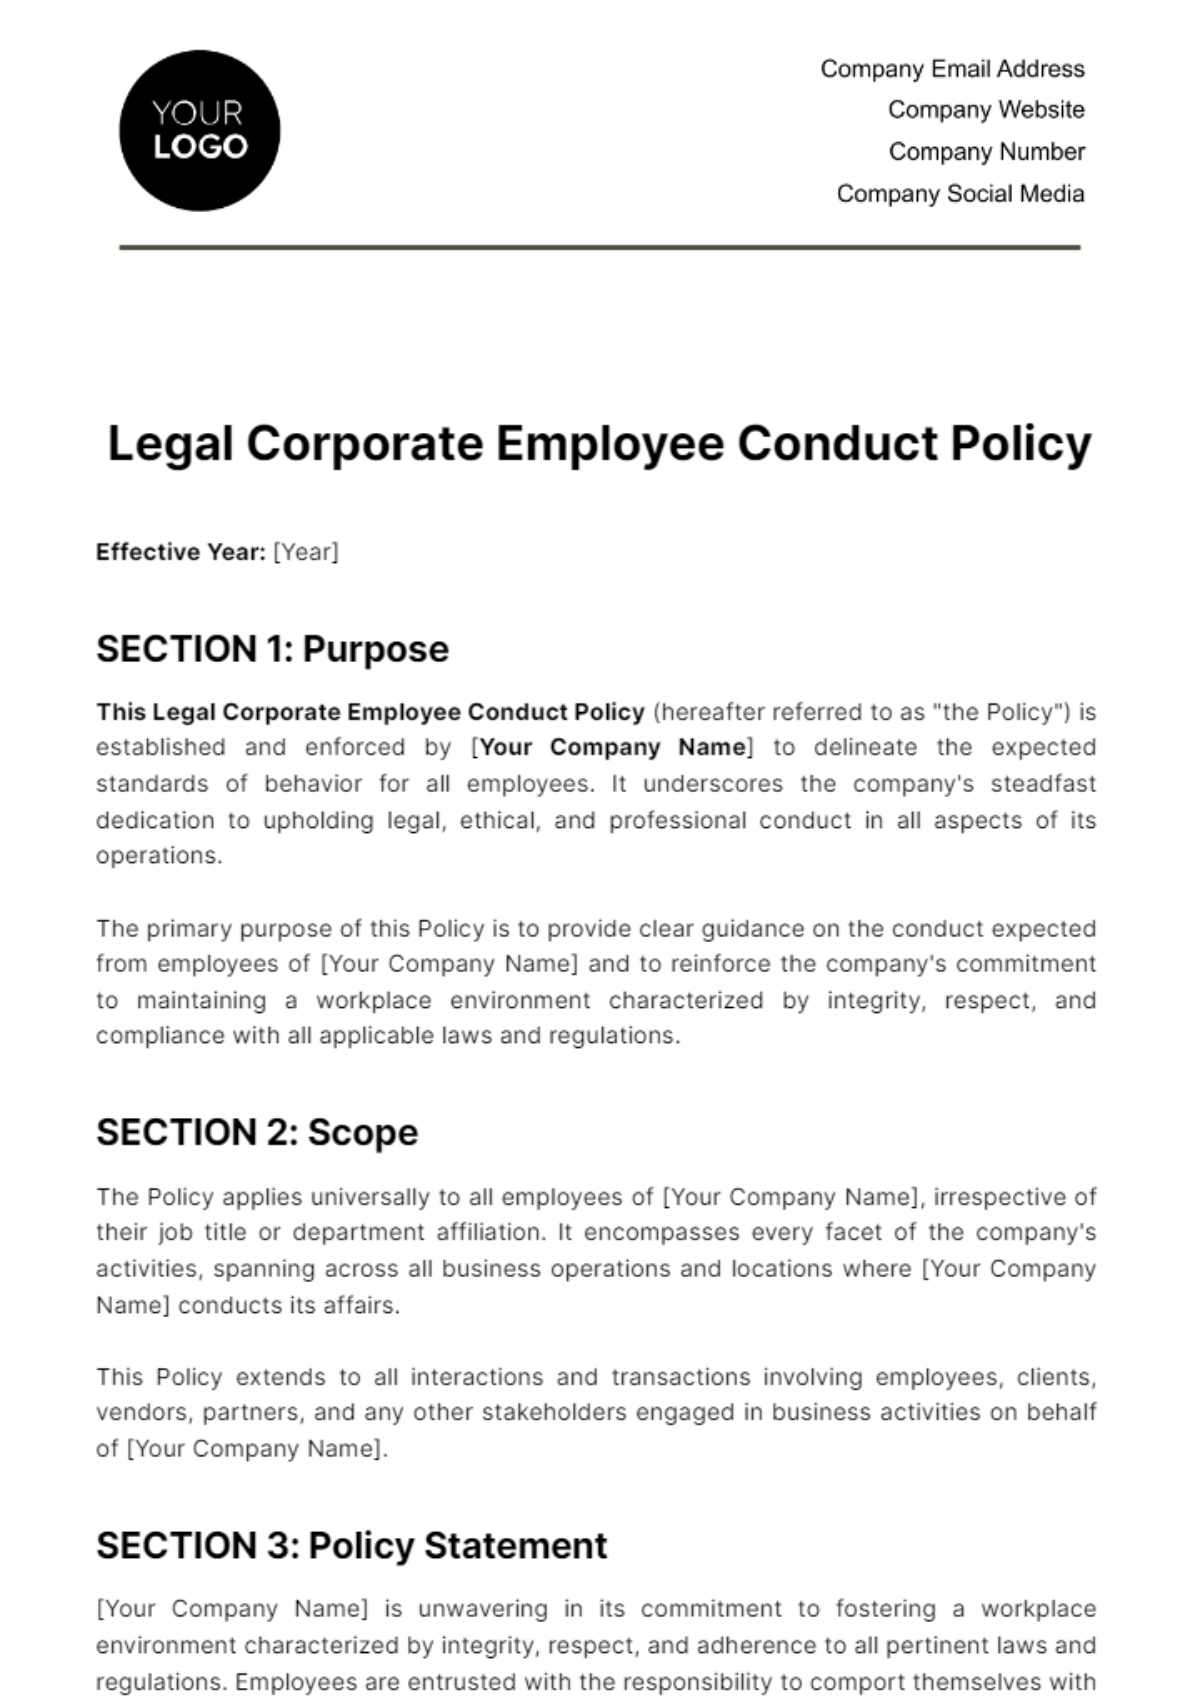 Legal Corporate Employee Conduct Policy Template